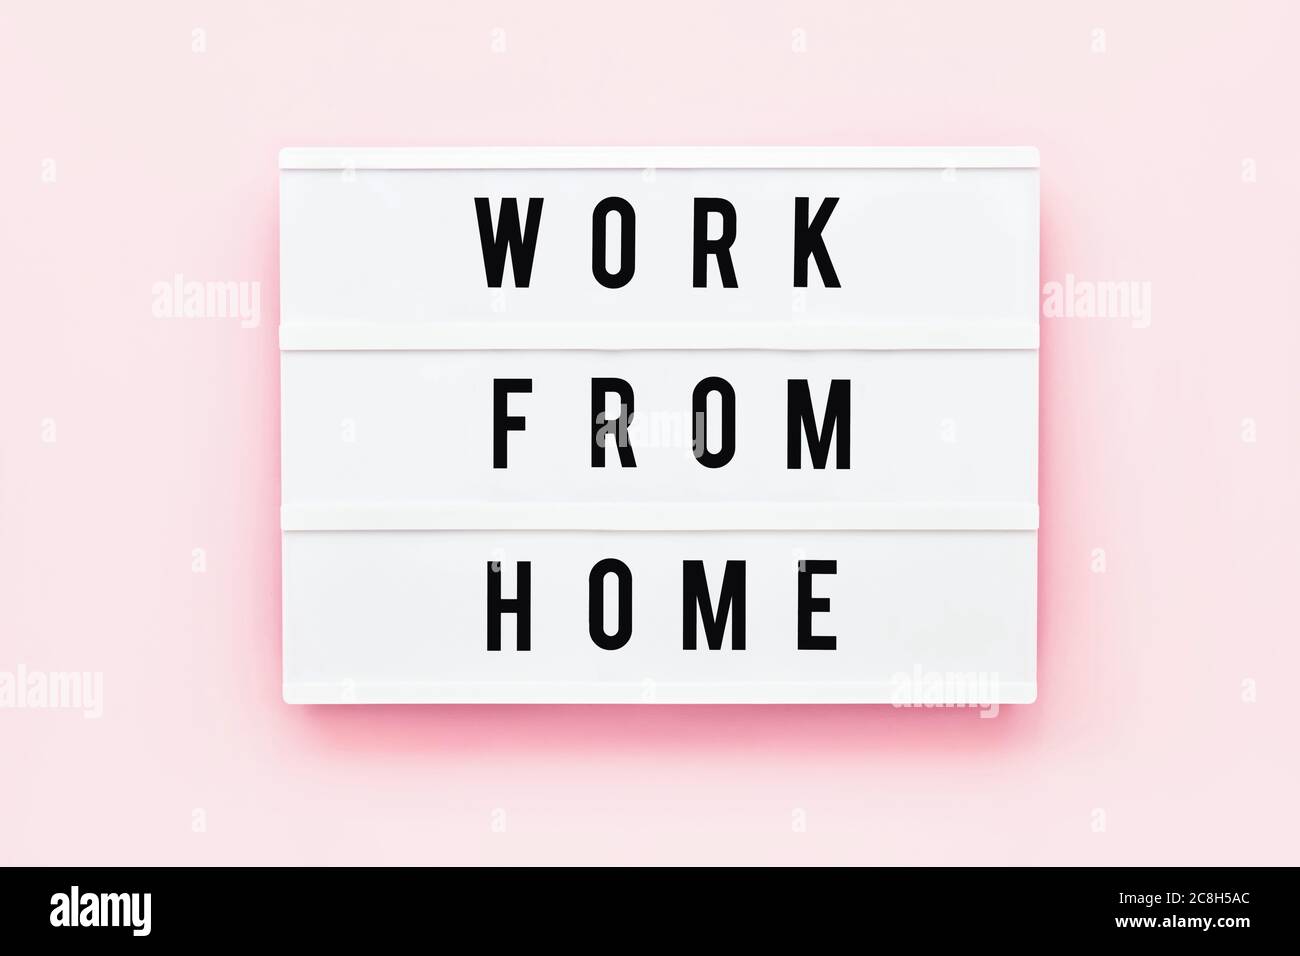 WORK FROM HOME written in light box on pink background. Healthcare and medical concept. Top view. Quarantine concept. Stock Photo